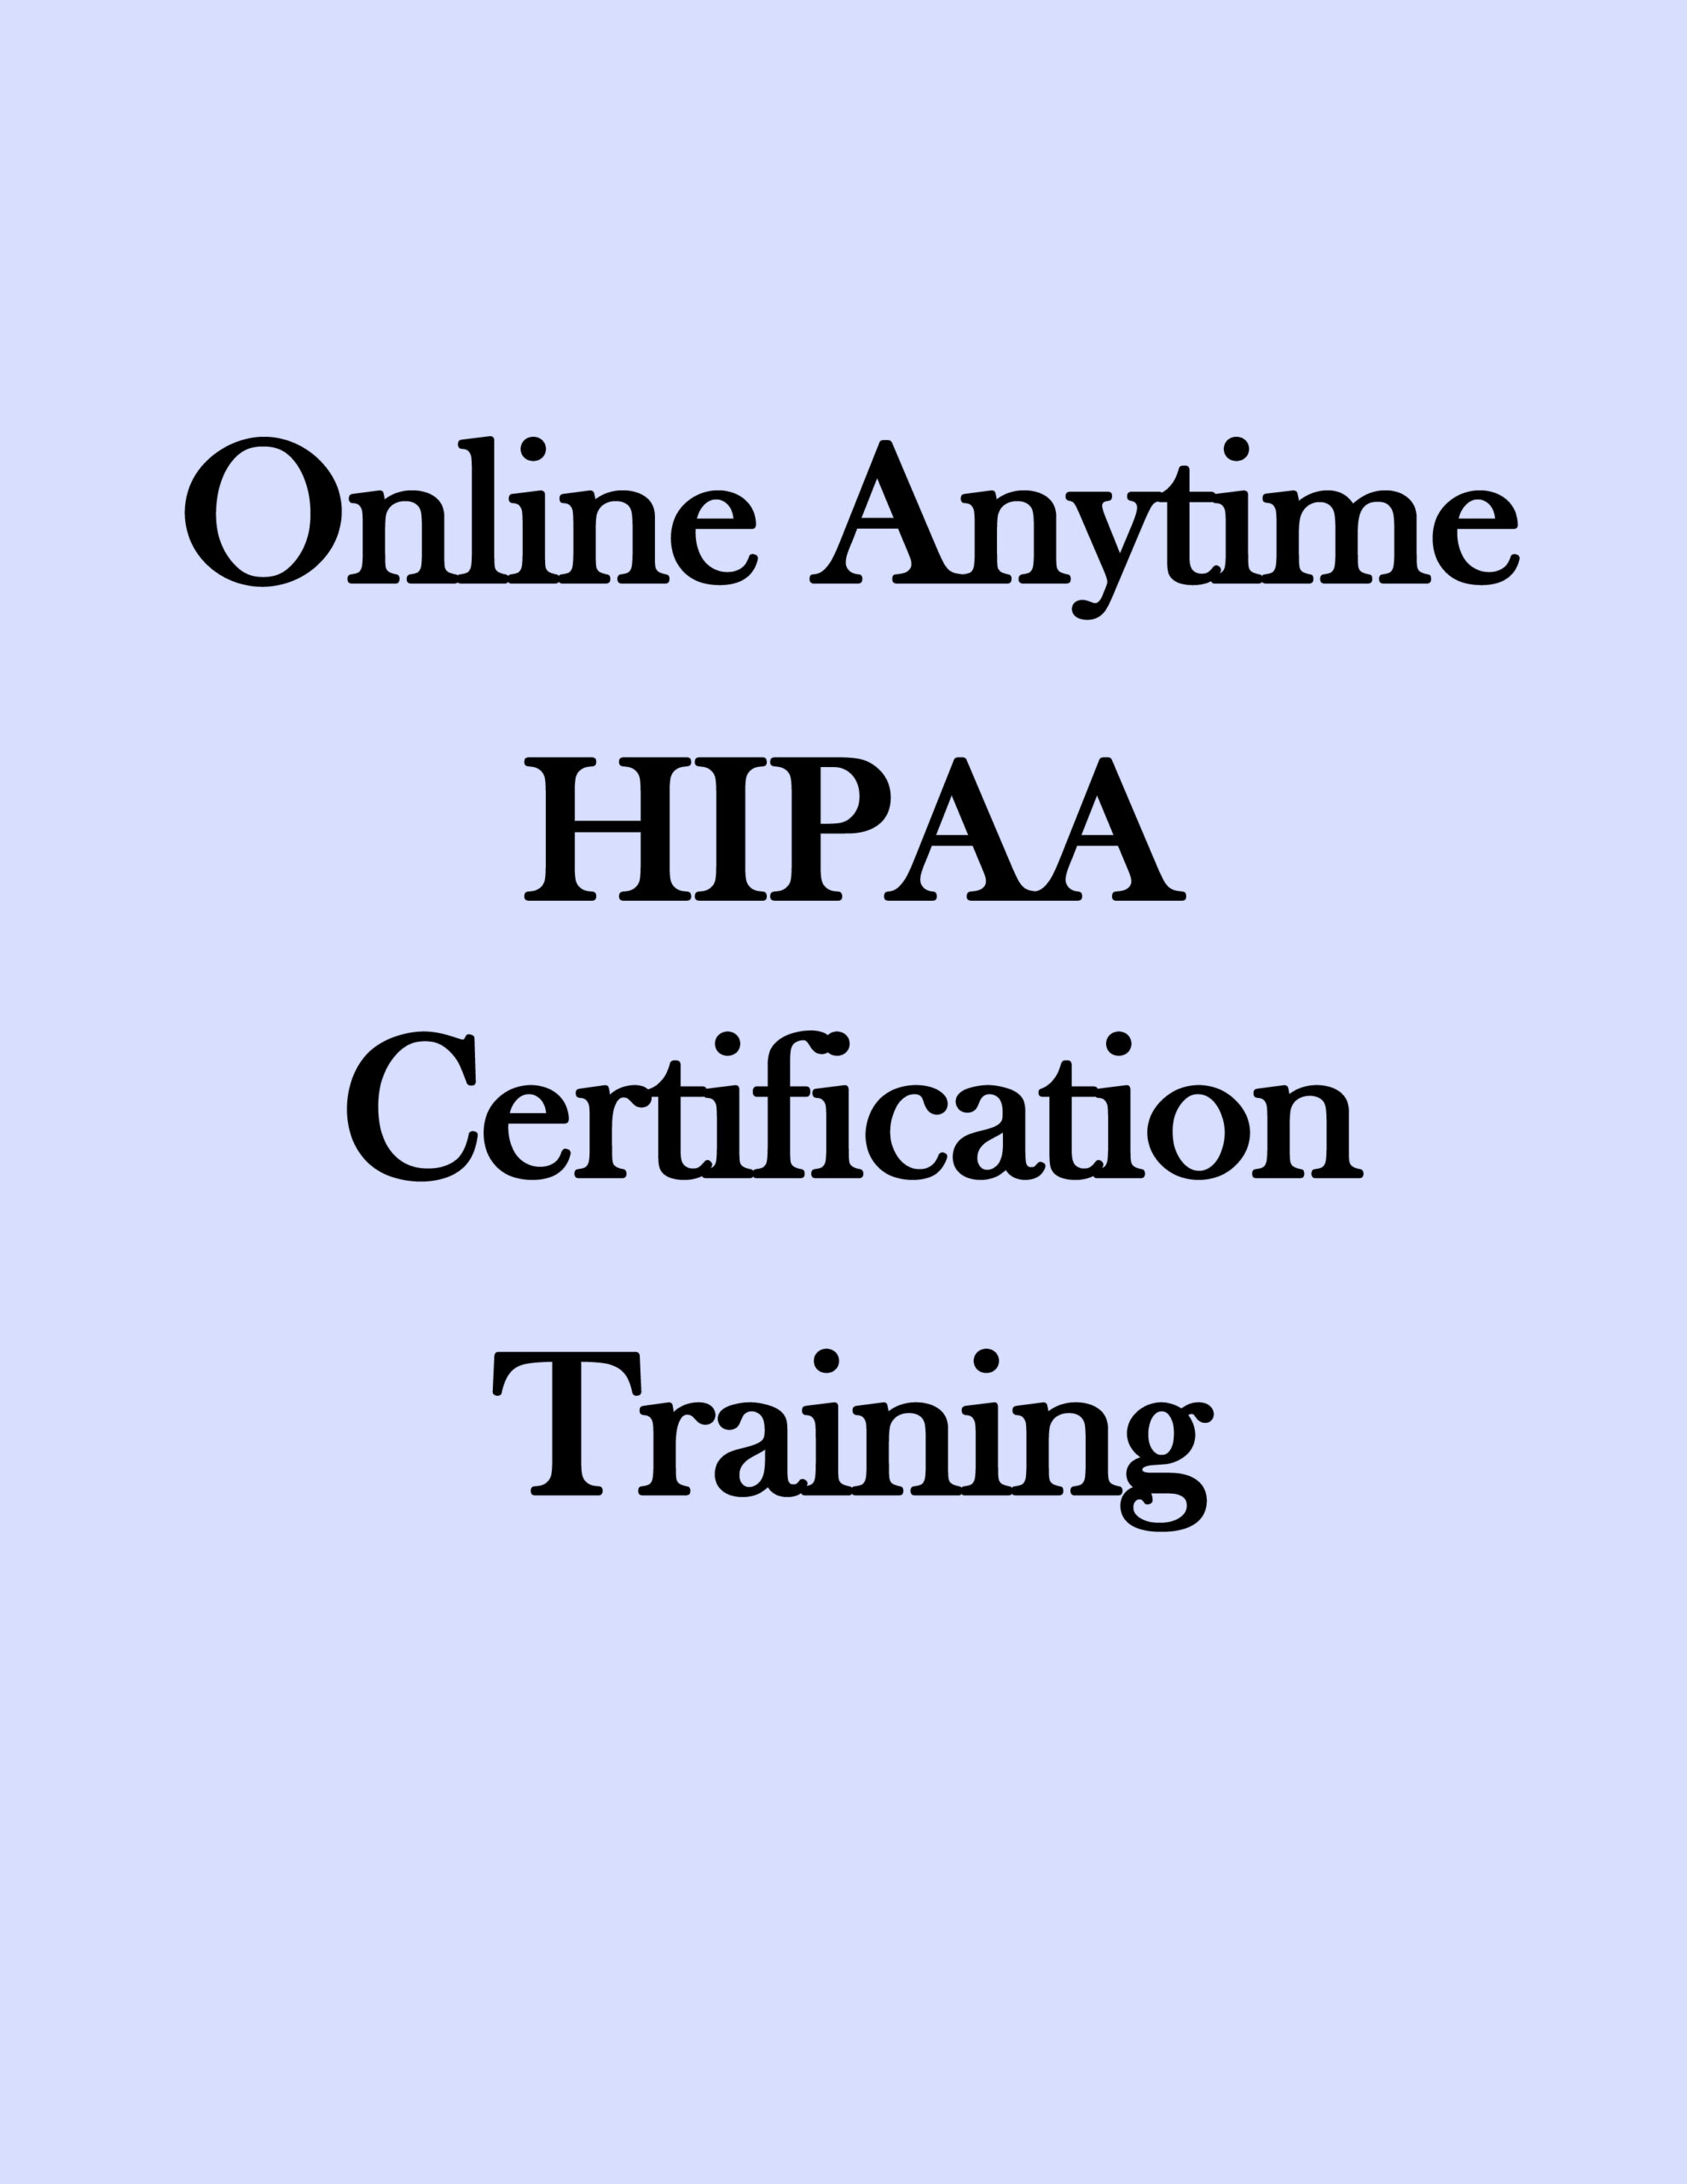 Online Anytime HIPAA Certification Training